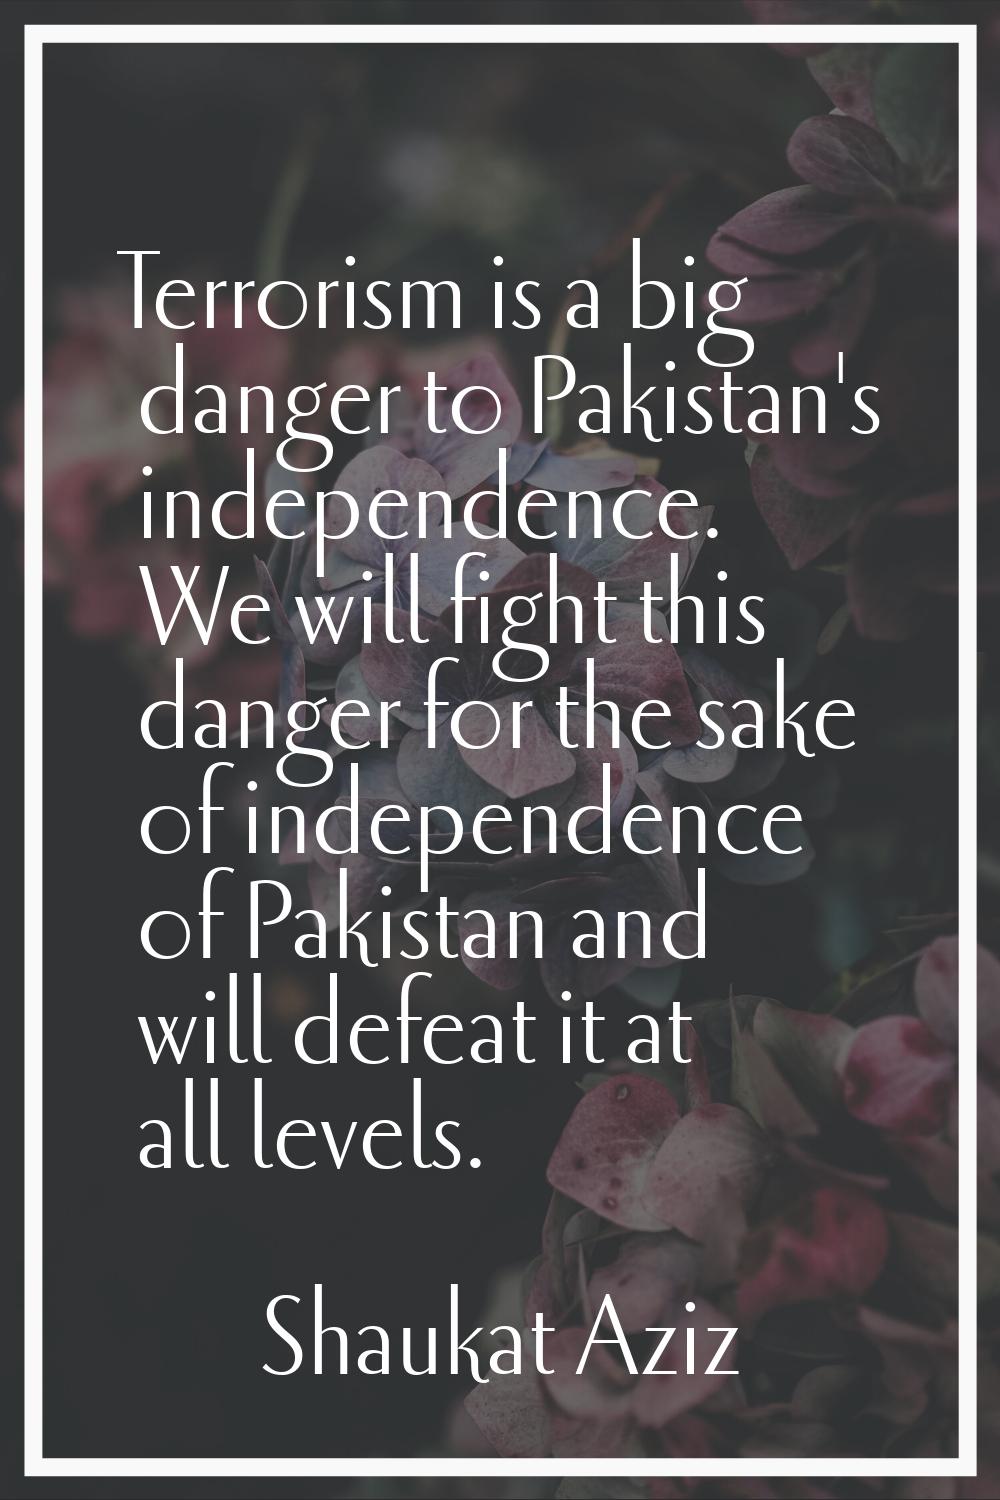 Terrorism is a big danger to Pakistan's independence. We will fight this danger for the sake of ind